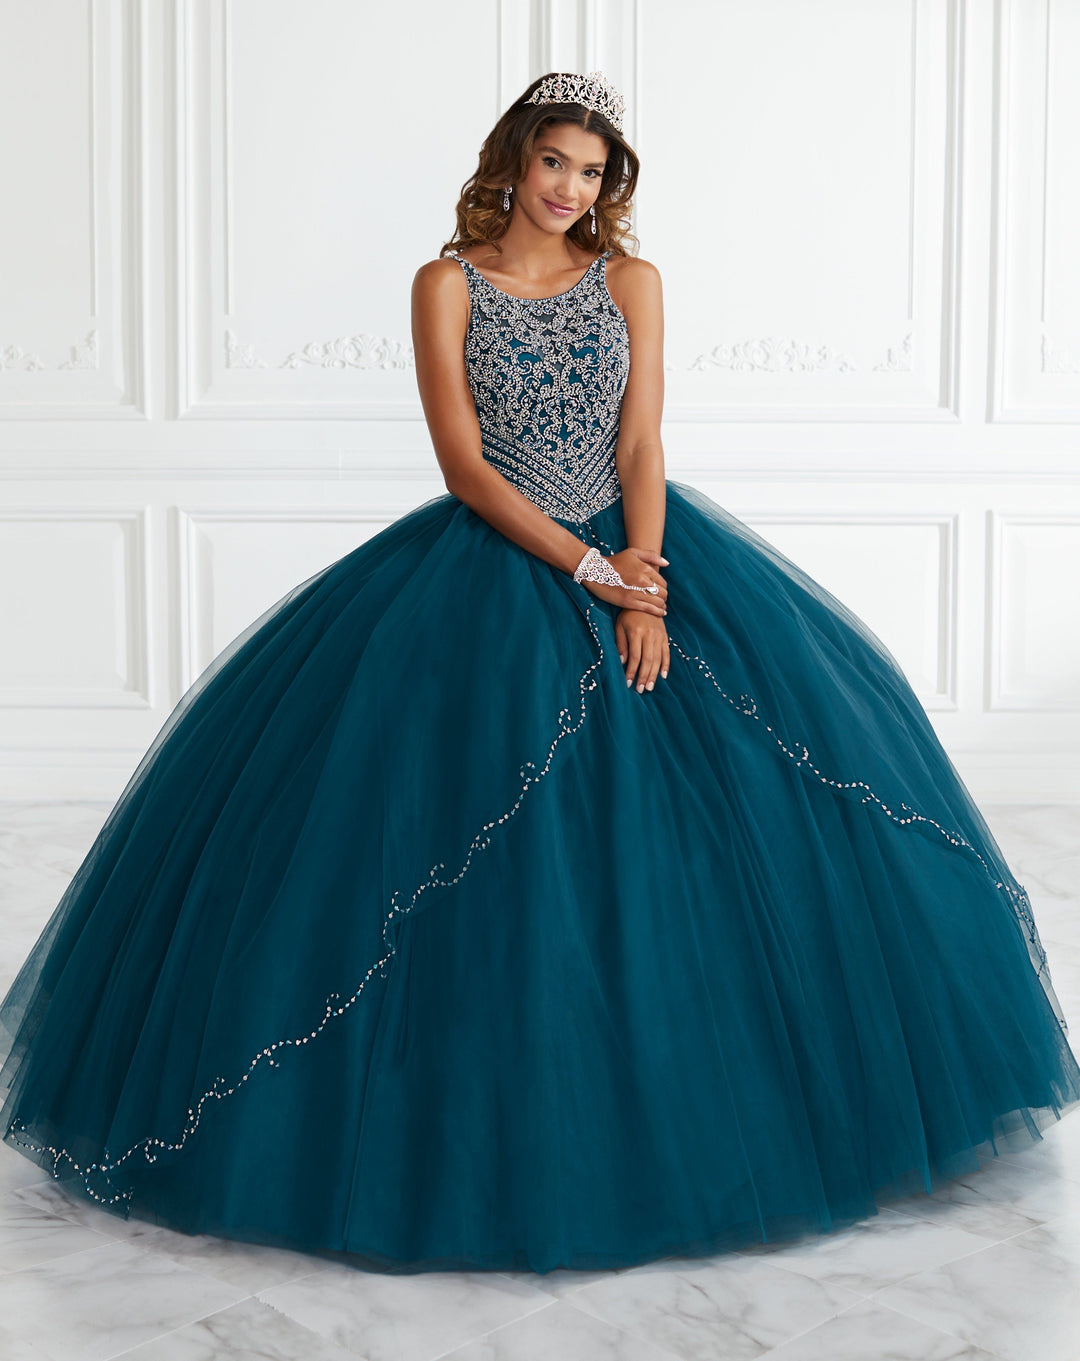 Beaded Split Front Quinceanera Dress by Fiesta Gowns 56388-Quinceanera Dresses-ABC Fashion